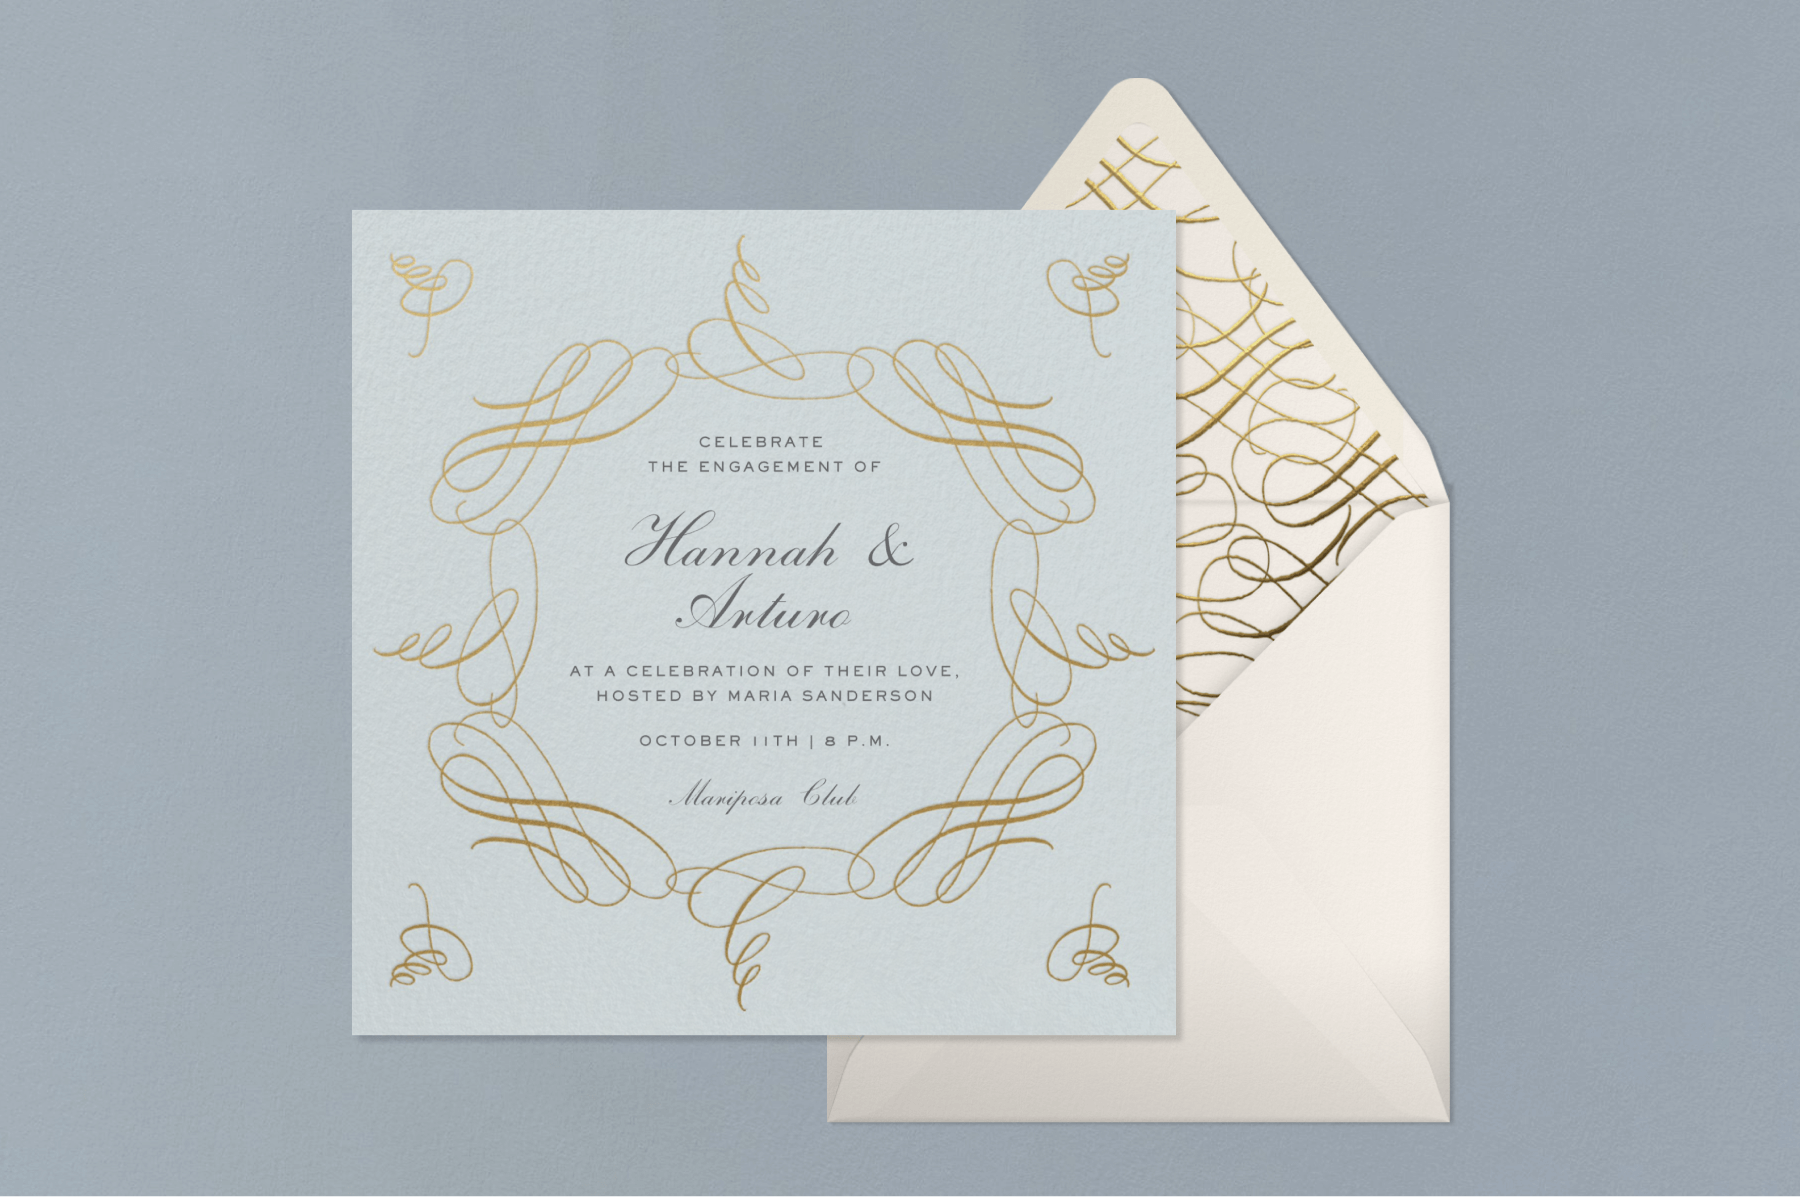 A light-blue engagement party invitation with a flourish of calligraphic elements and a matching envelope.